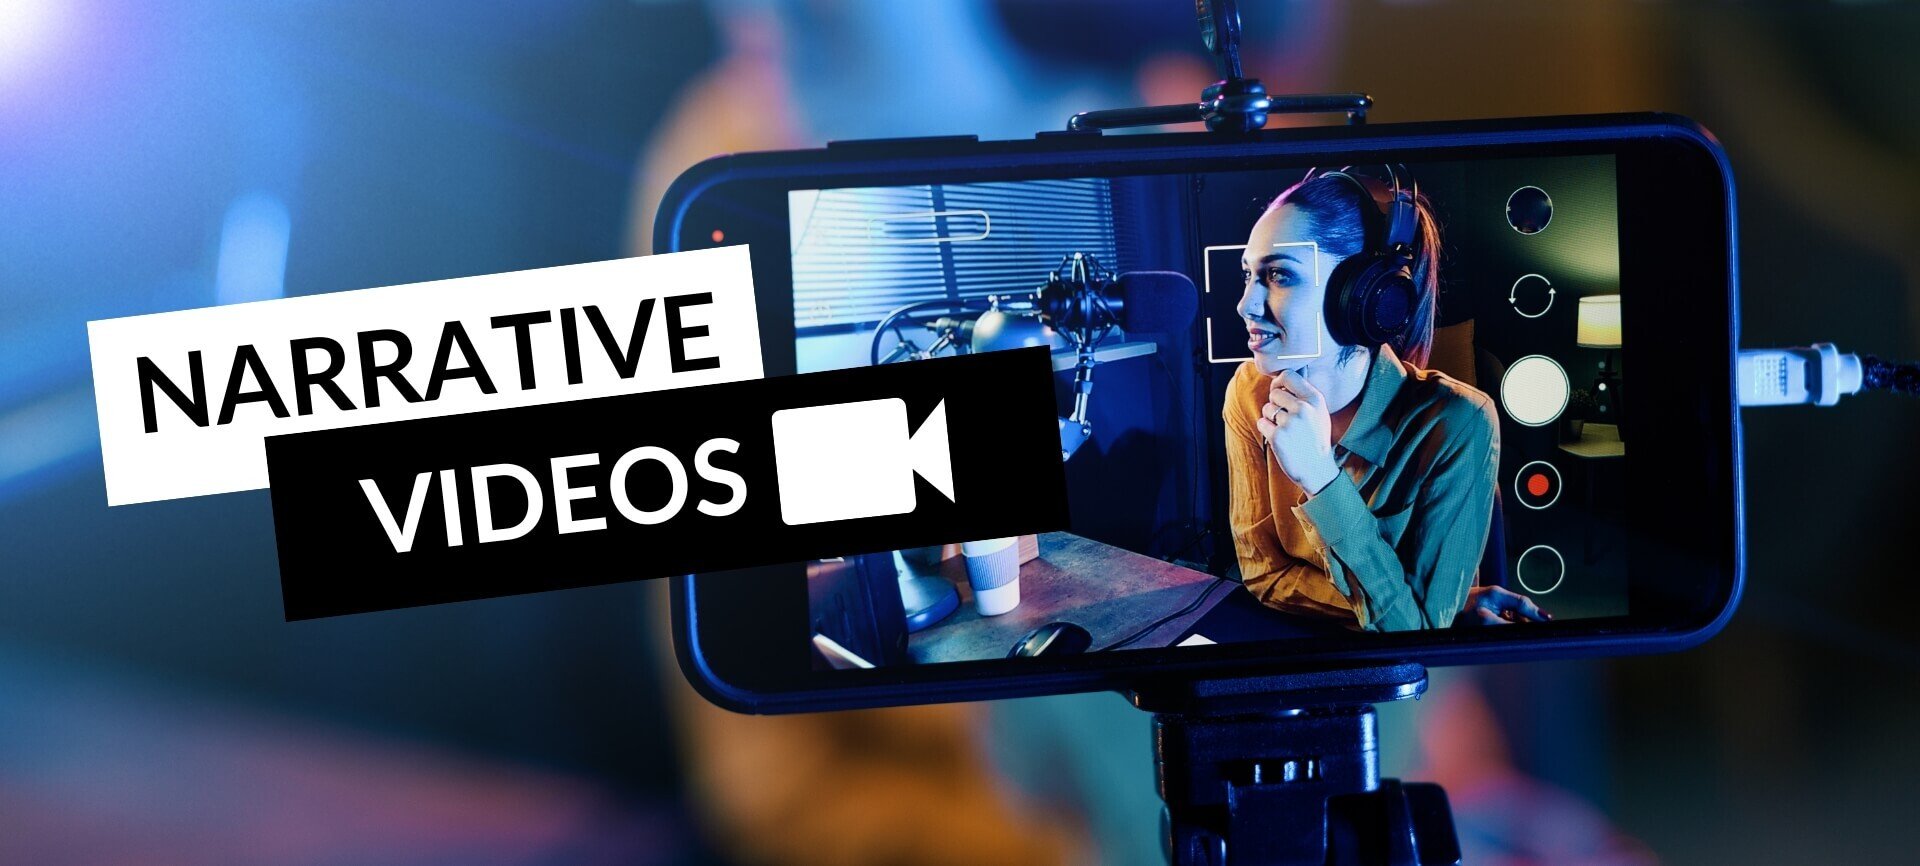 Narrative Videos | How to make music video by Jass Bianchi